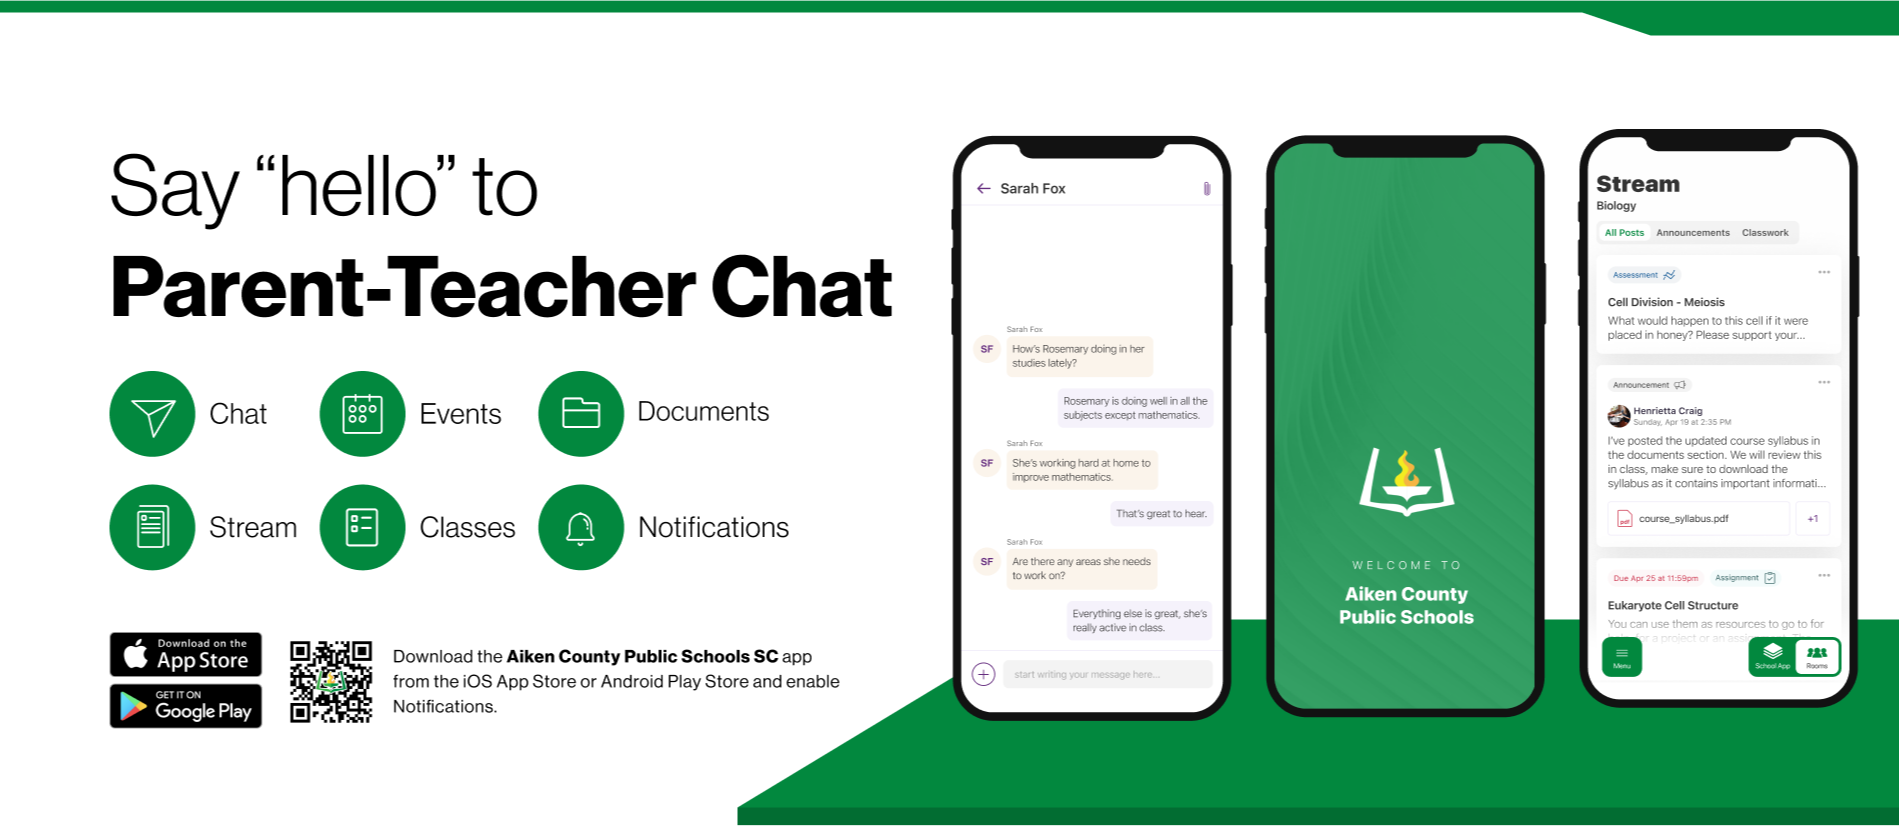 Say "hello" to Parent-Teacher Chat: Chat, Events, Documents, Stream, Classes, Notifications. Download the Aiken County Public Schools SC app from the iOS App Store or Android Play Store and enable notifications. 